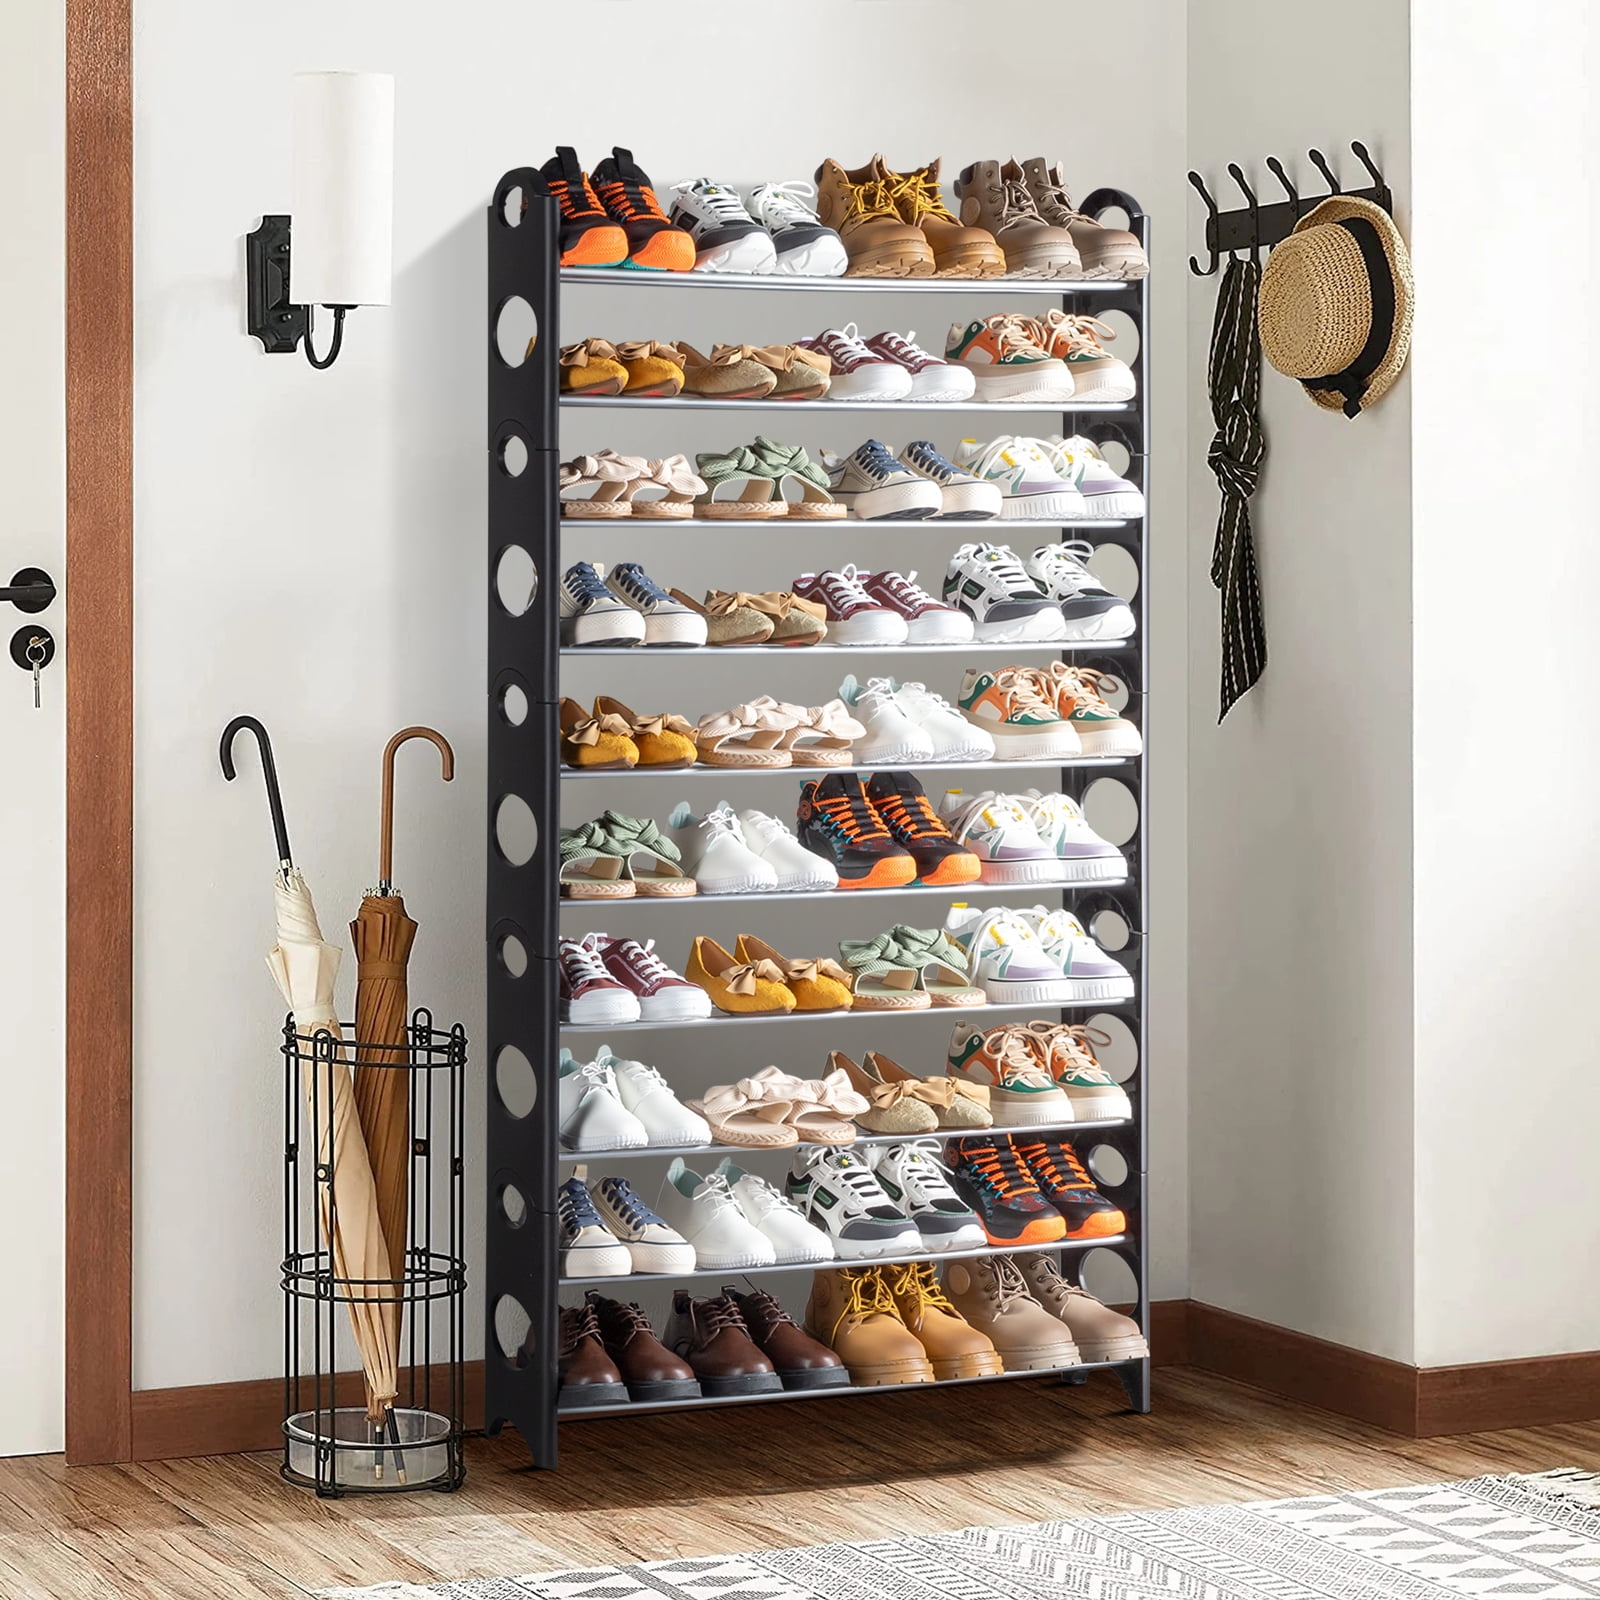 10 Tier Free Standing Shoes Rack Space Saving Shoes Organizer - Black